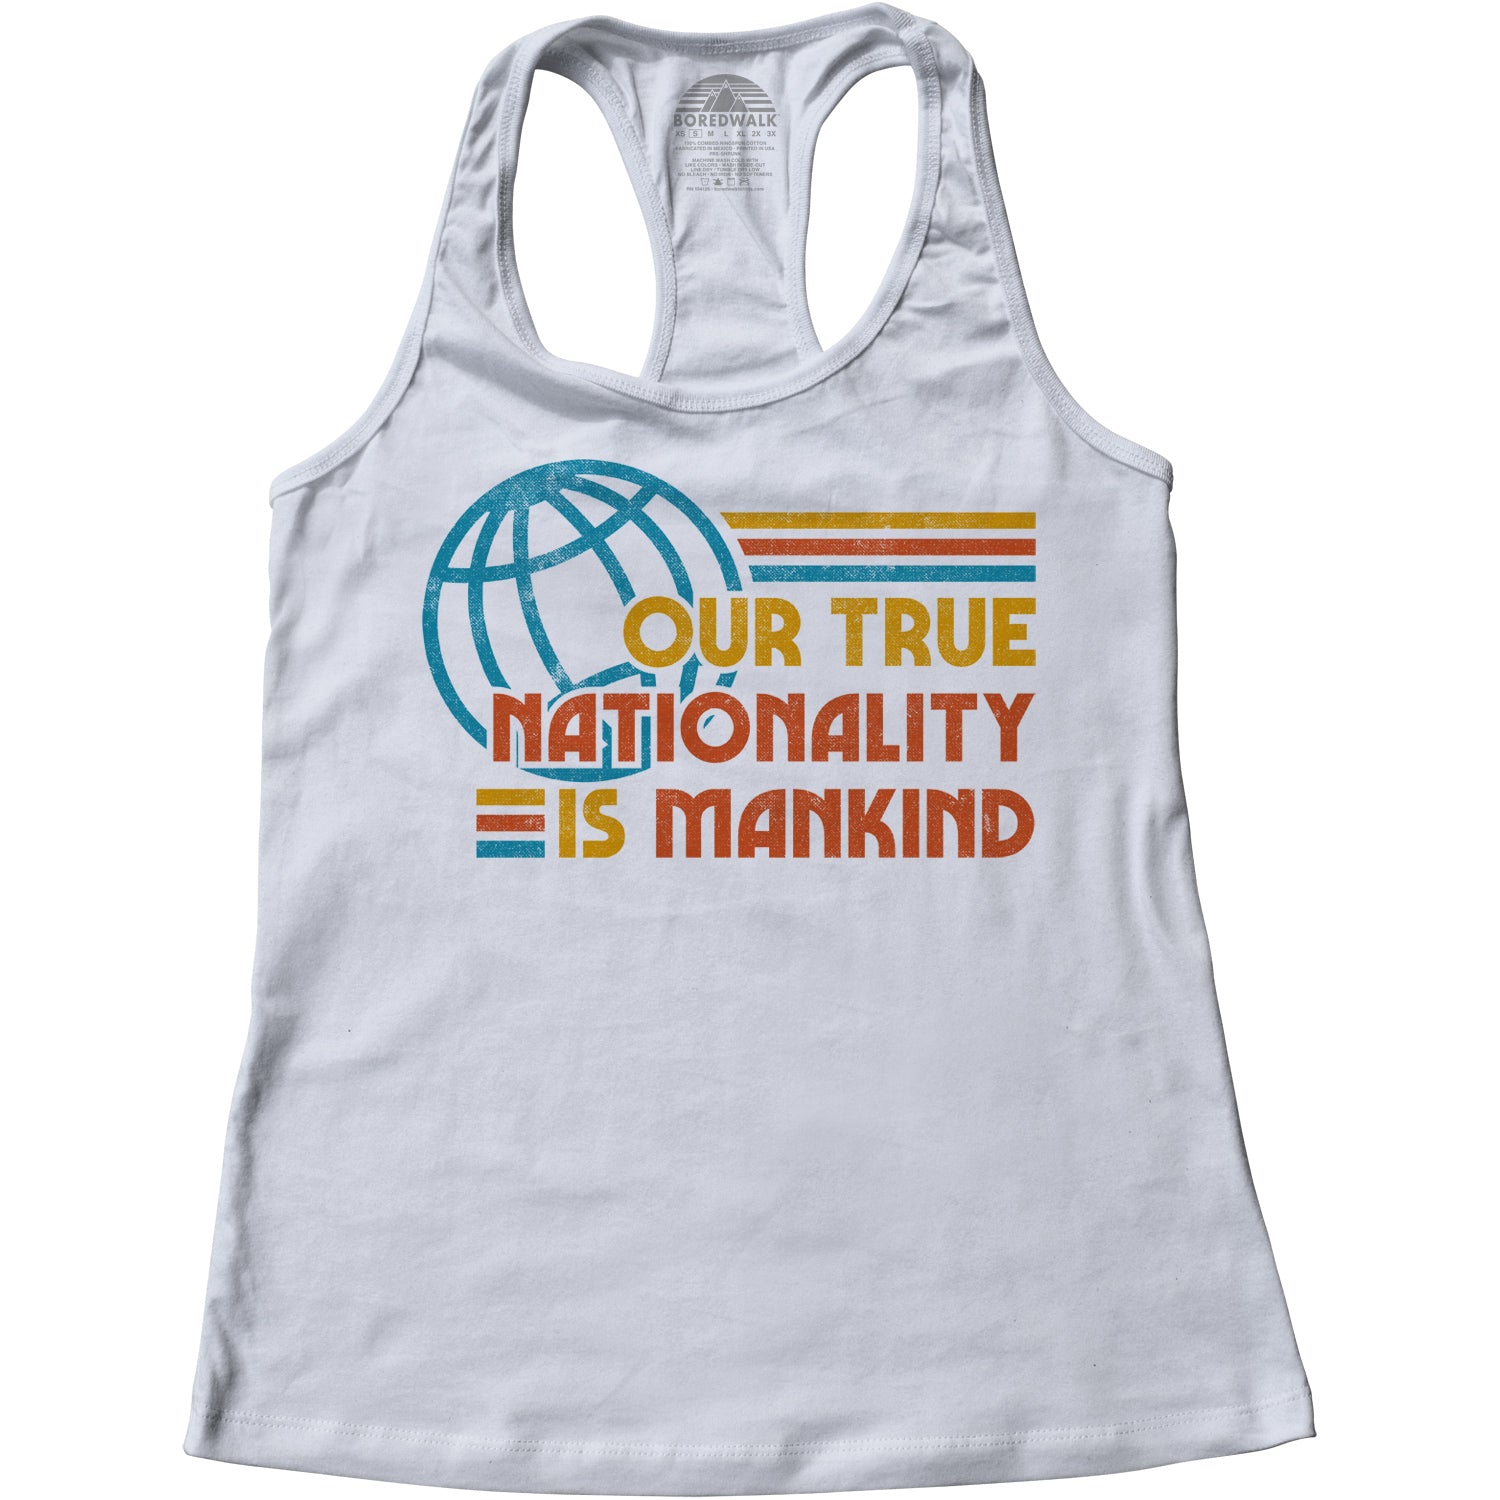 Women's Our True Nationality is Mankind Racerback Tank Top